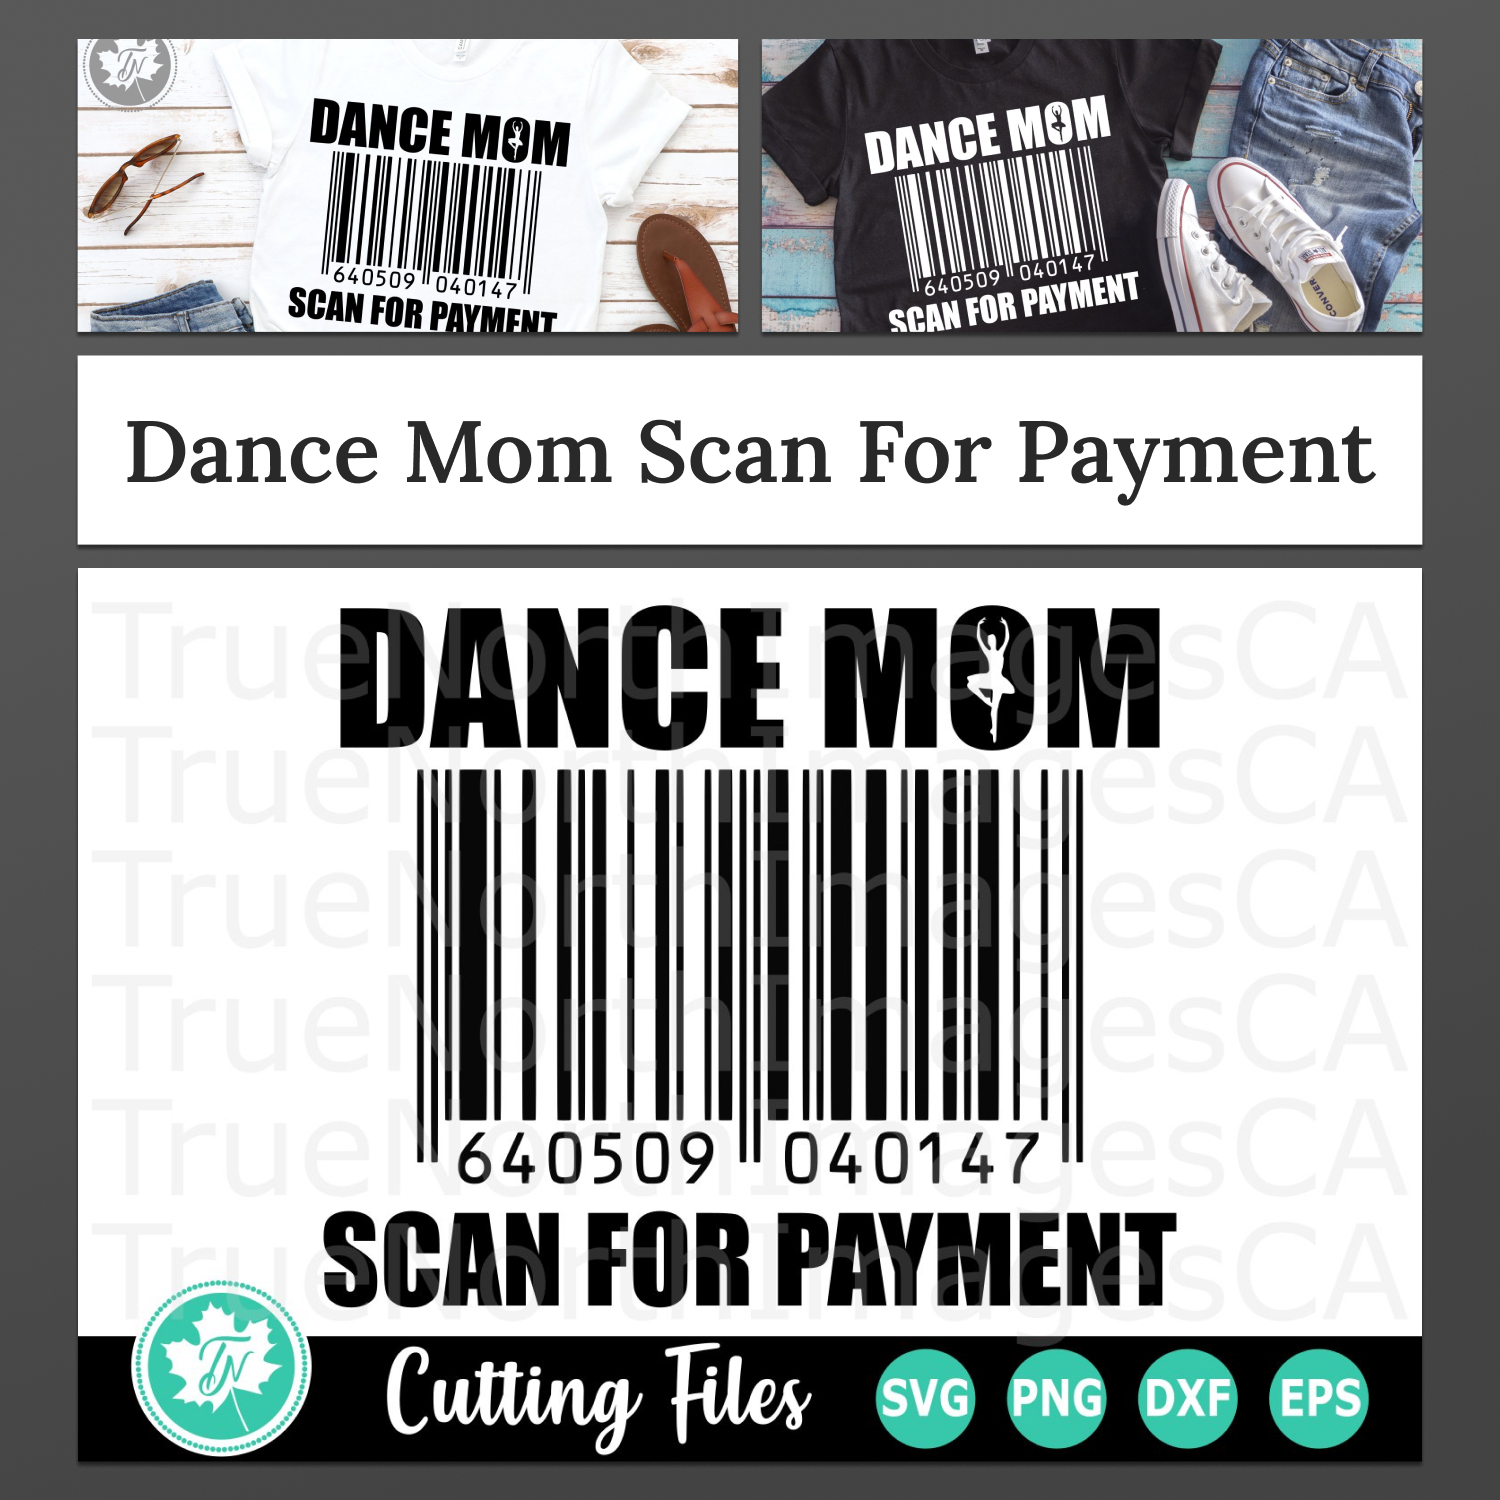 Dance mom scan for payment preview.